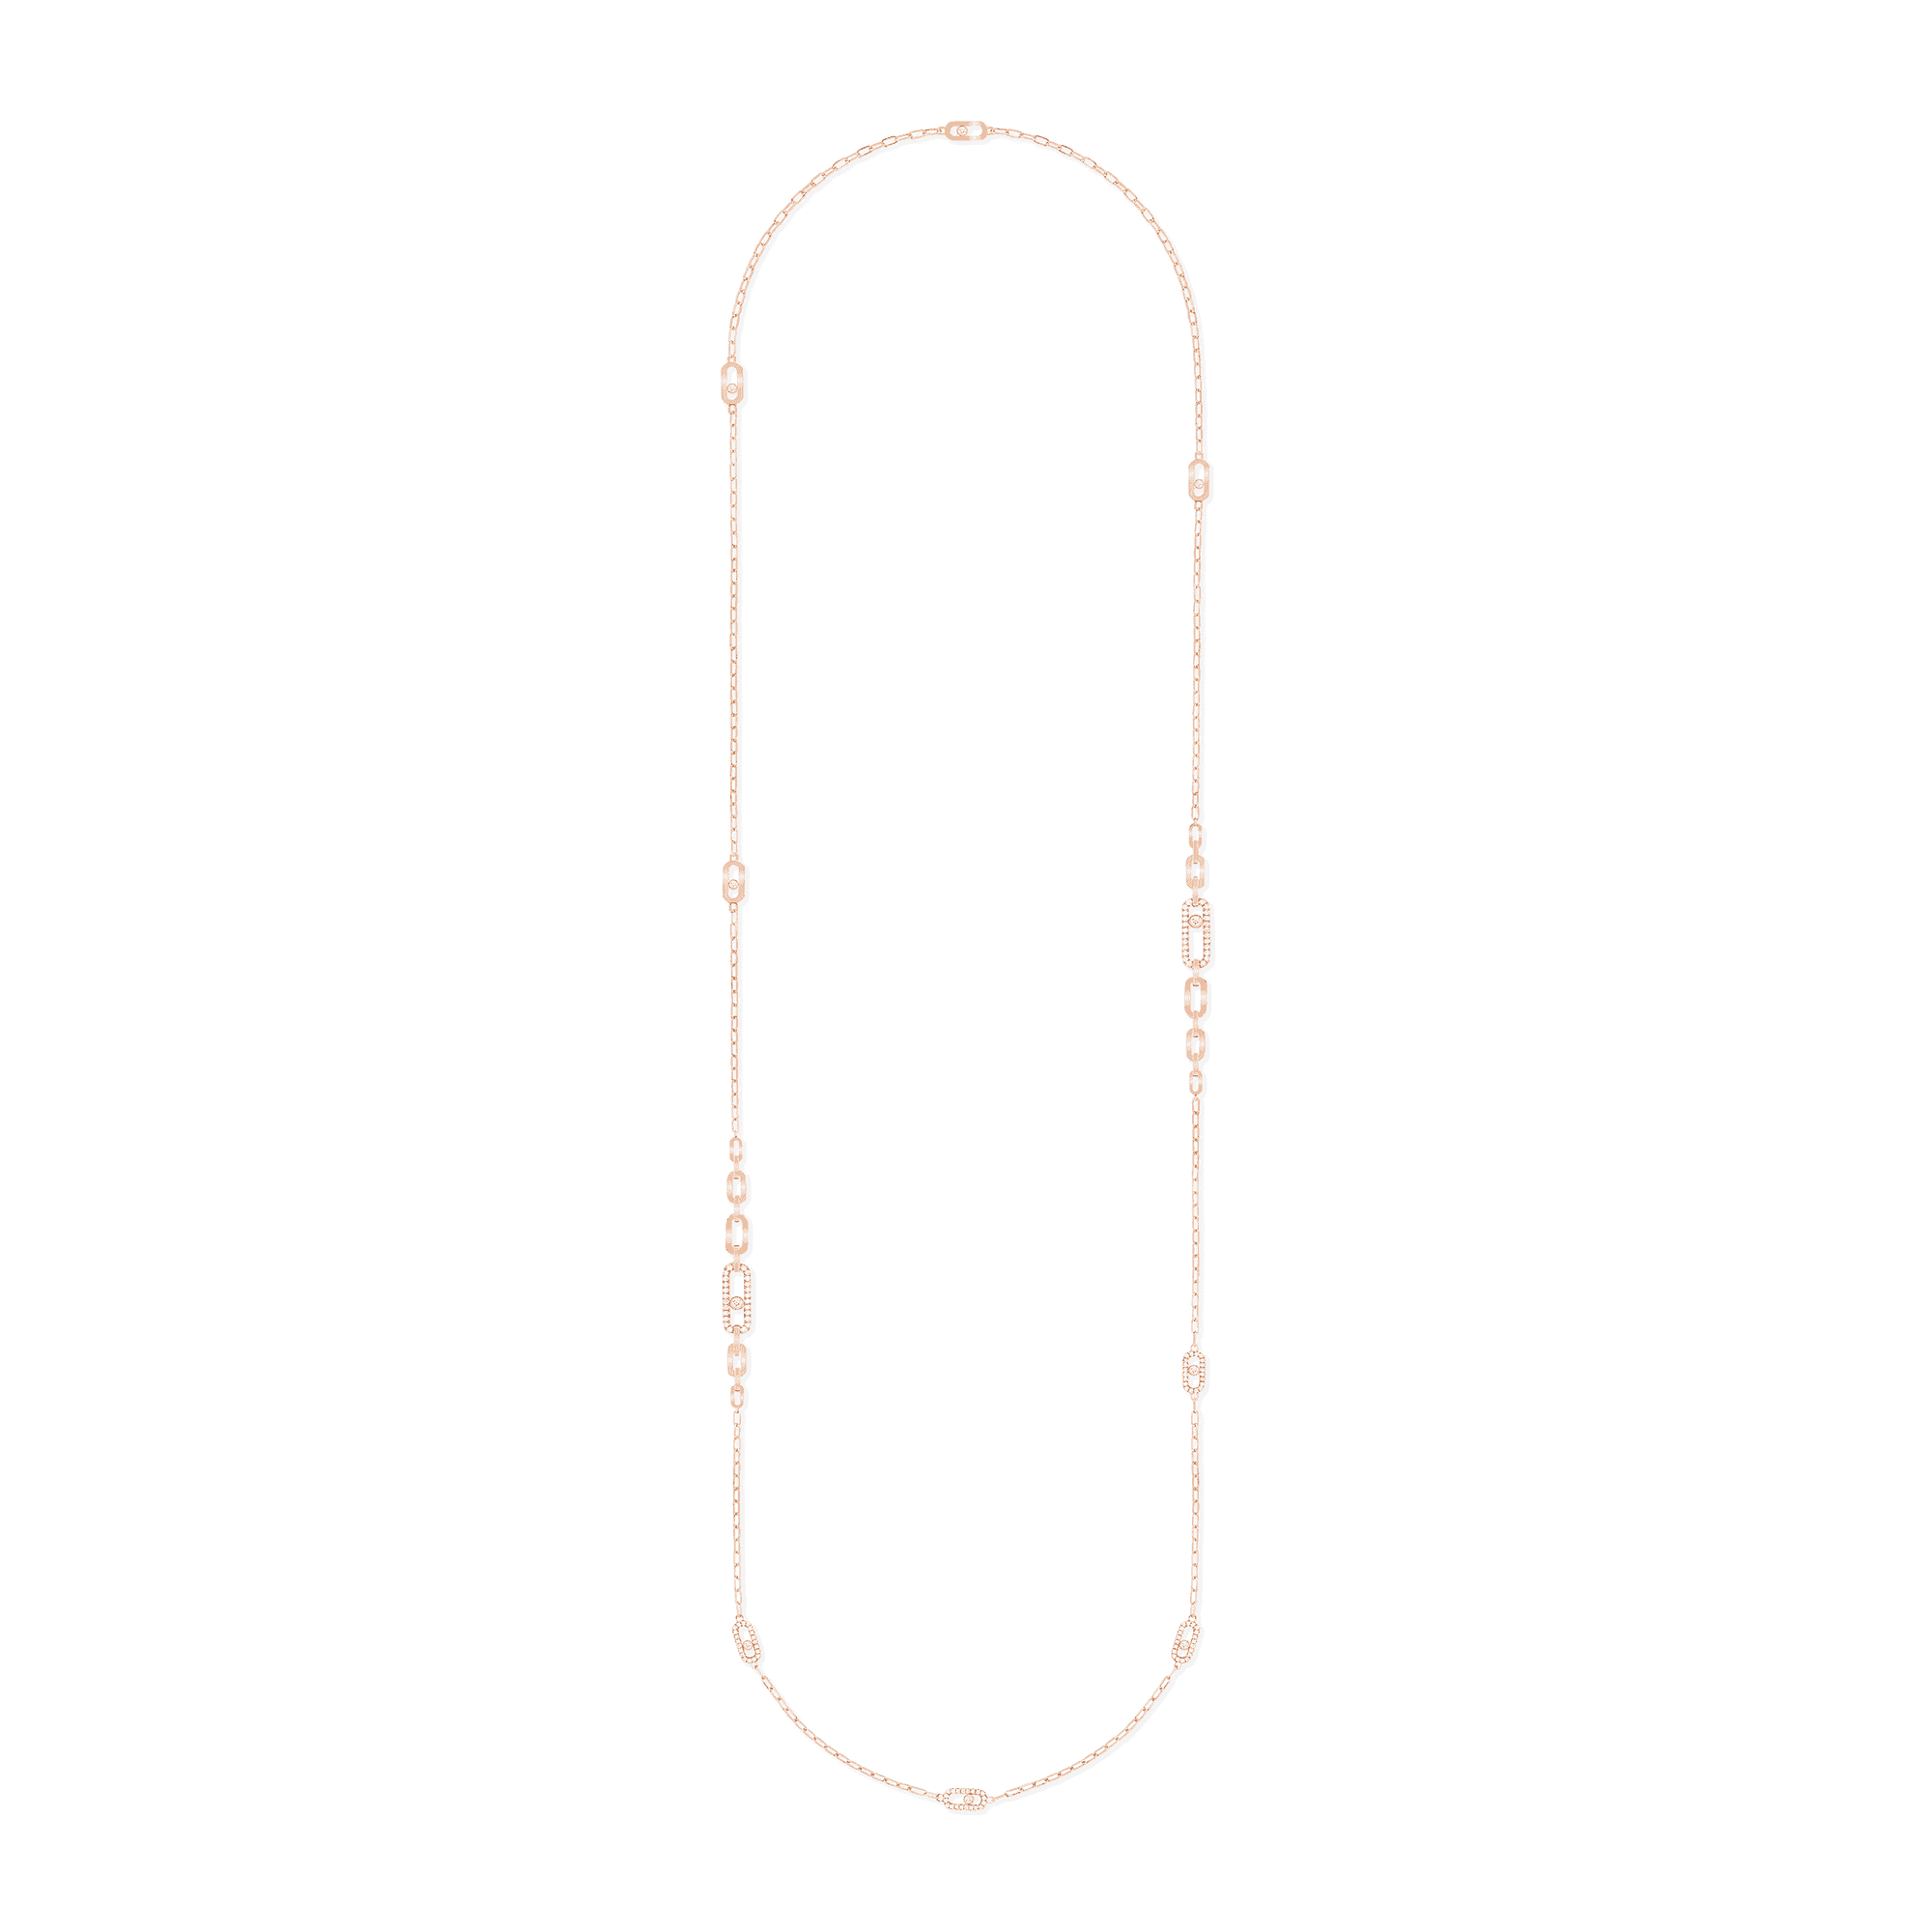 18ct pink gold Move Uno long length diamond necklace